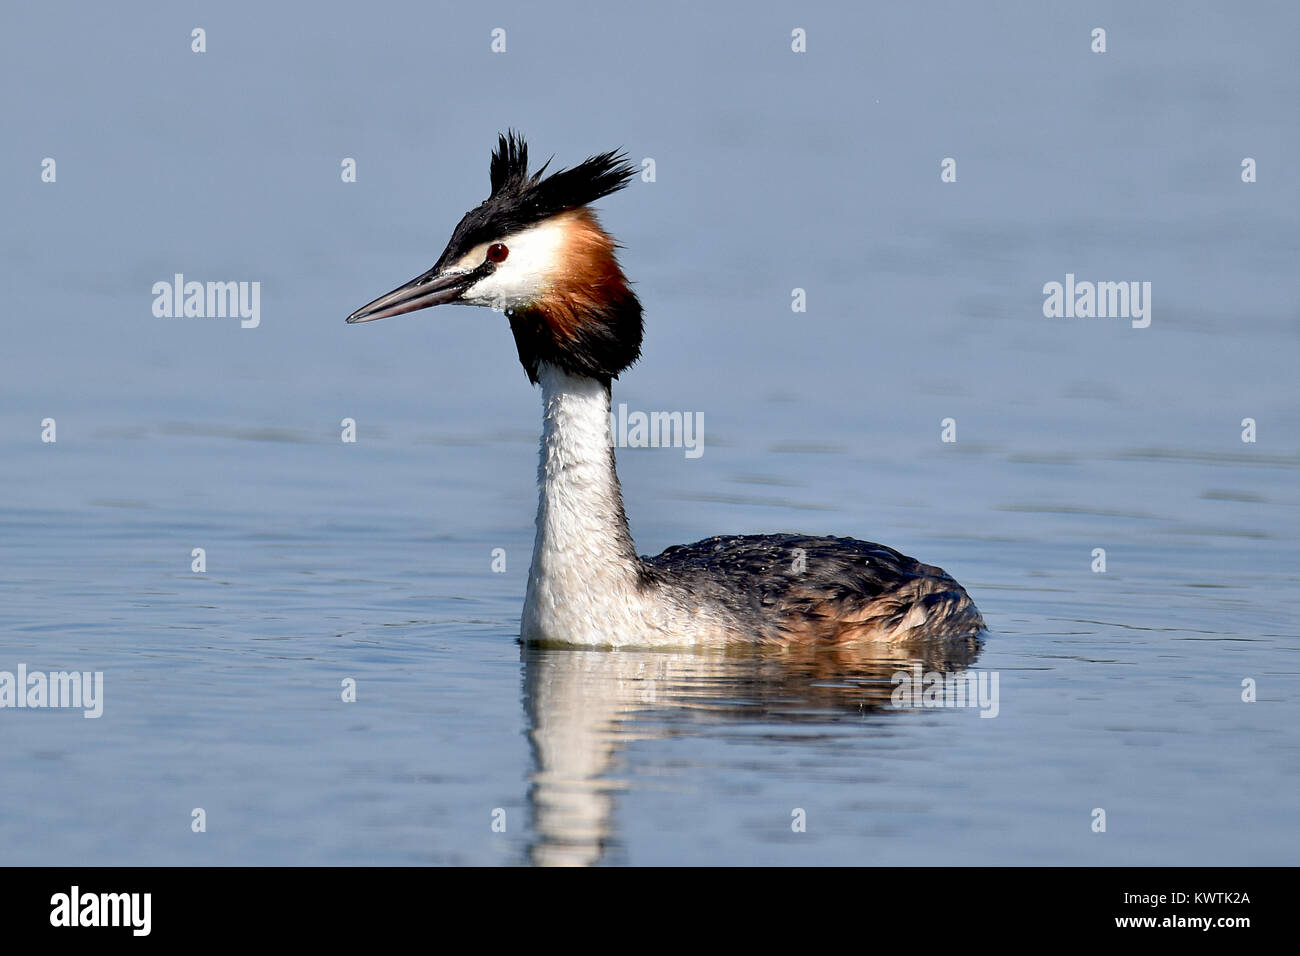 The great crested grebe (Podiceps cristatus) is a member of the grebe family of water birds noted for its elaborate mating display Stock Photo